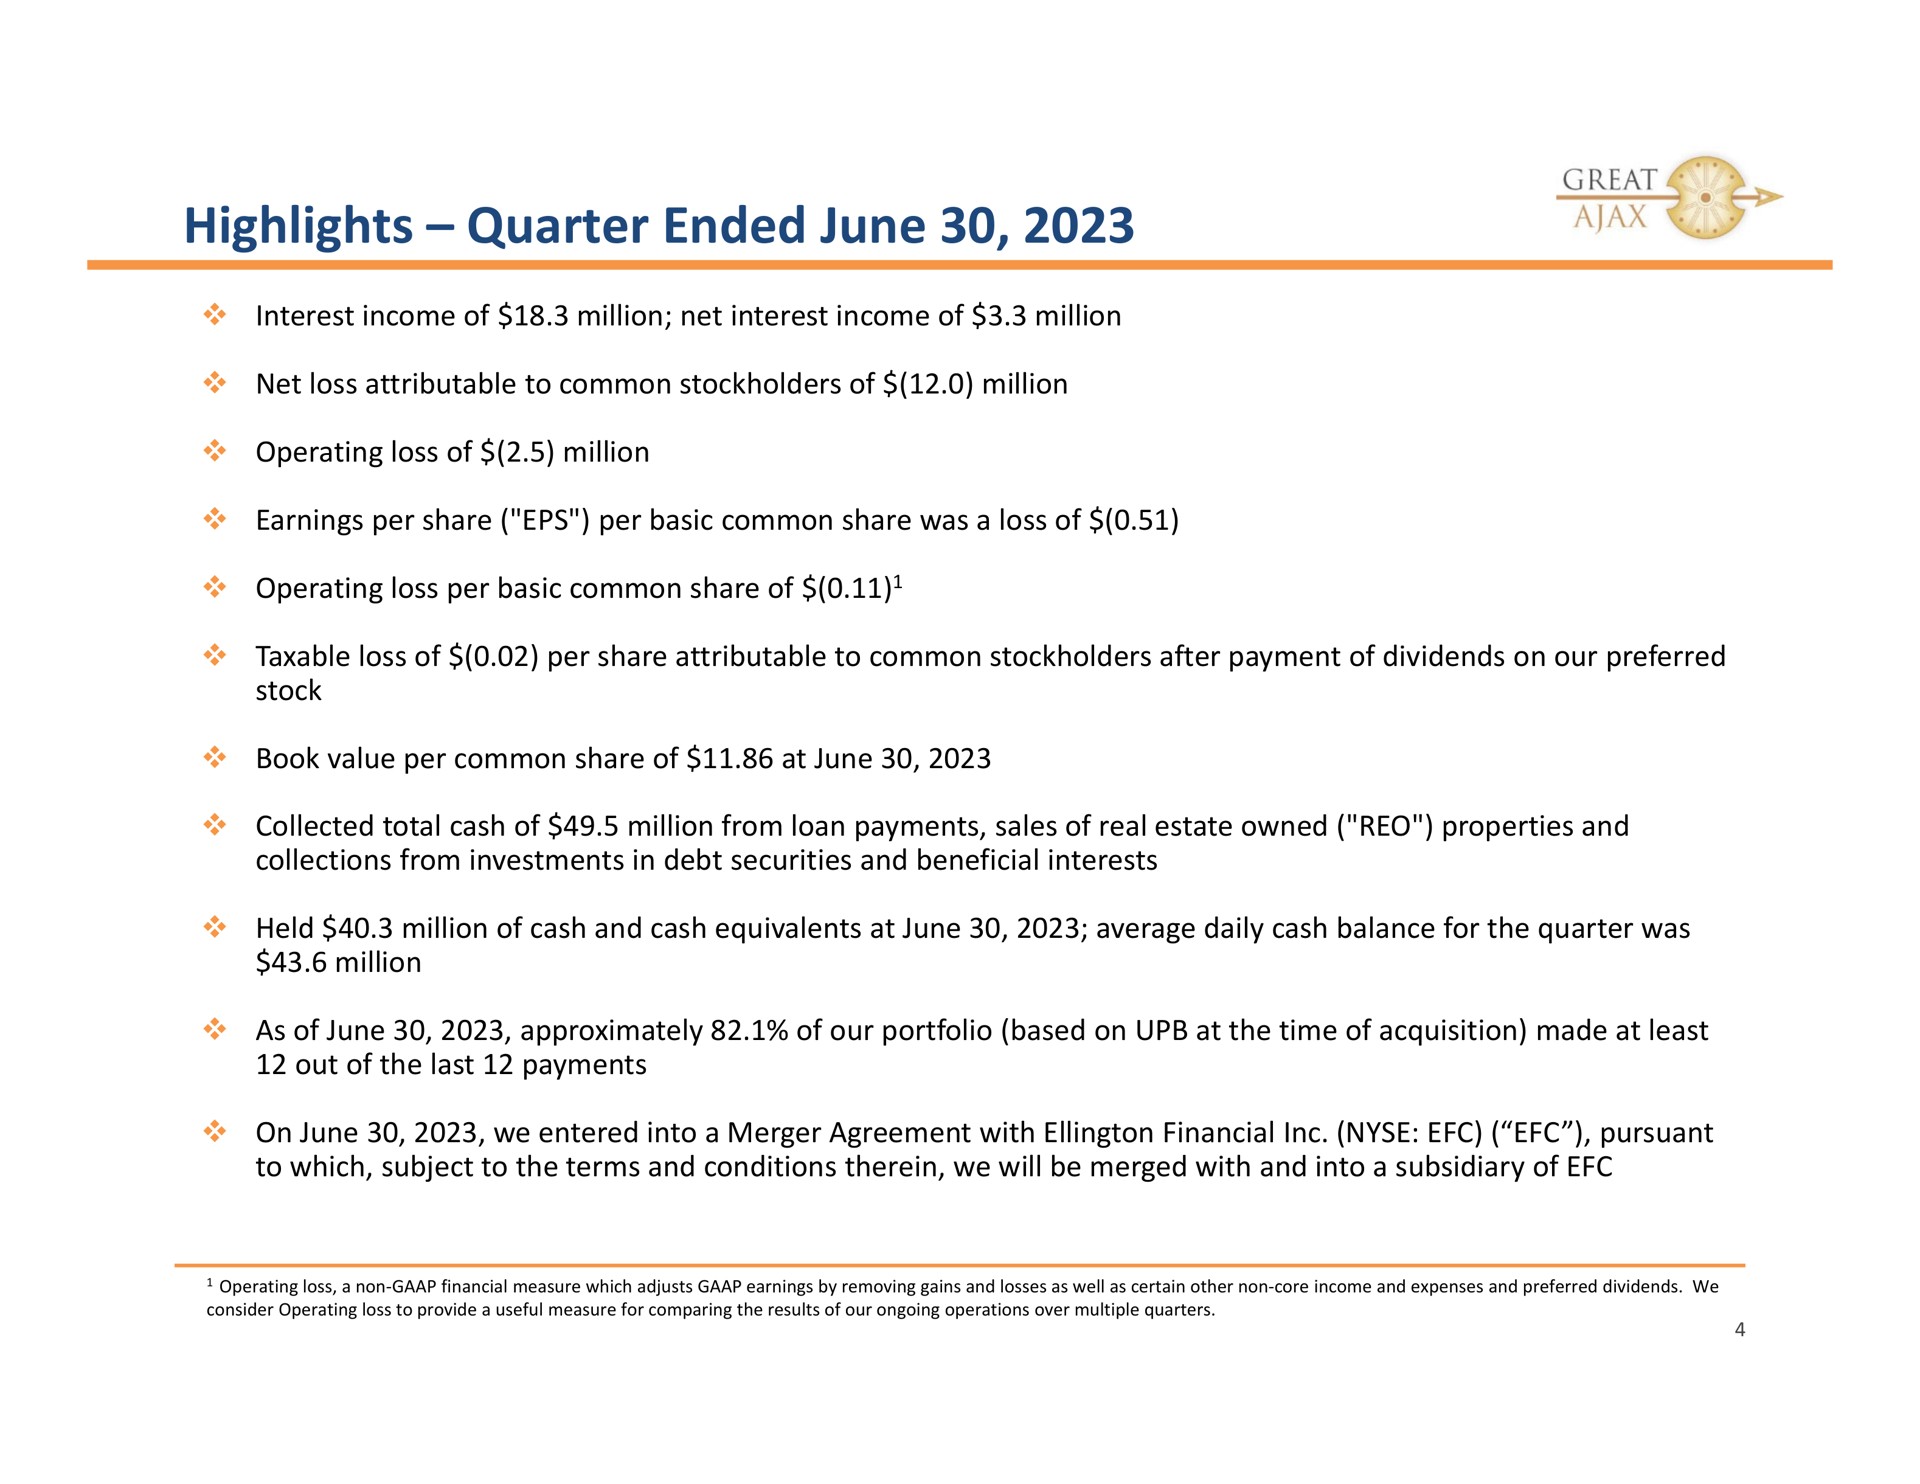 highlights quarter ended june interest income of million net interest income of million net loss attributable to common stockholders of million operating loss of million earnings per share per basic common share was a loss of operating loss per basic common share of taxable loss of per share attributable to common stockholders after payment of dividends on our preferred stock book value per common share of at june collected total cash of million from loan payments sales of real estate owned properties and collections from investments in debt securities and beneficial interests held million of cash and cash equivalents at june average daily cash balance for the quarter was million as of june approximately of our portfolio based on at the time of acquisition made at least out of the last payments on june we entered into a merger agreement with financial pursuant to which subject to the terms and conditions therein we will be merged with and into a subsidiary of | Great Ajax